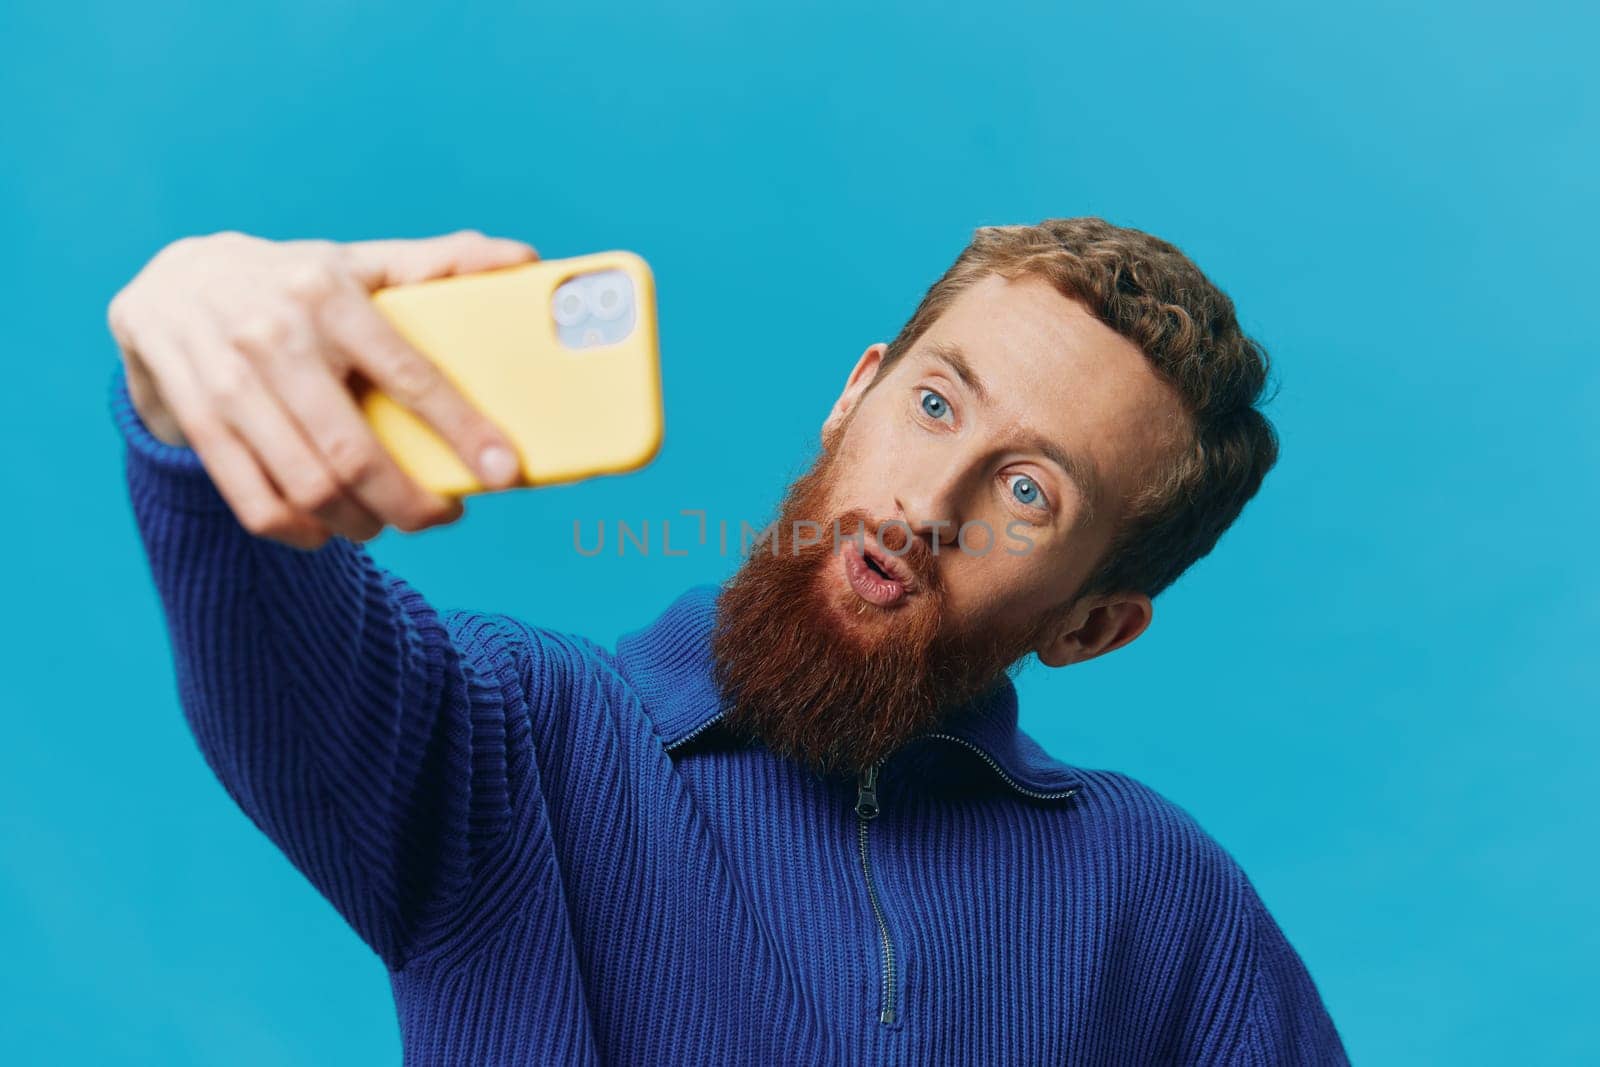 Portrait of a man with a phone in his hands blogger takes selfies, on a blue background. Communicating online social media, lifestyle by SHOTPRIME